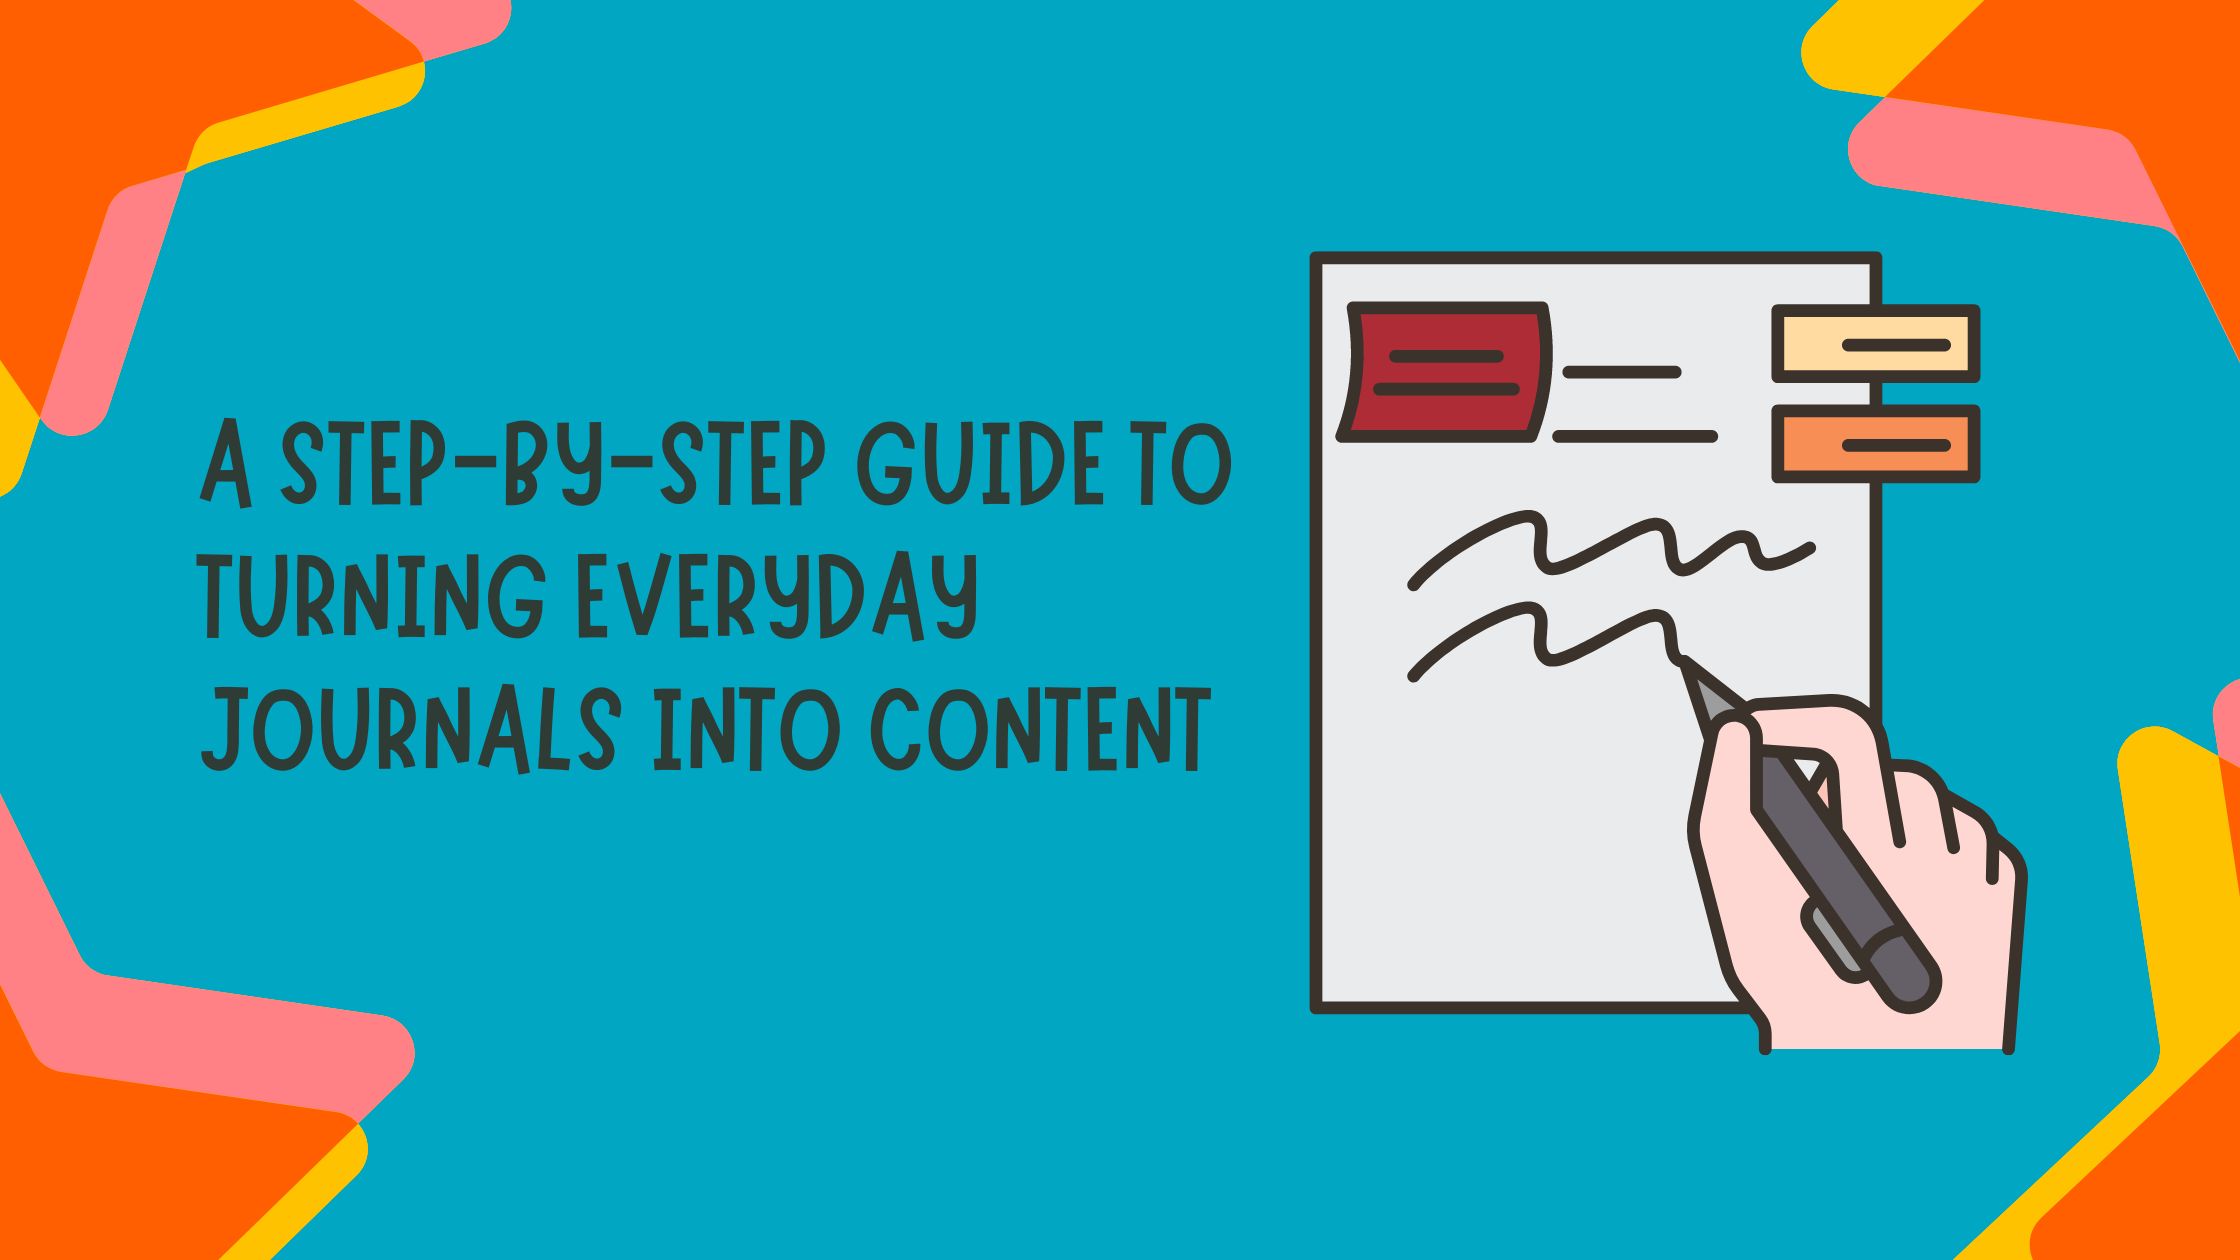 A step-by-step guide to turning everyday journals into content